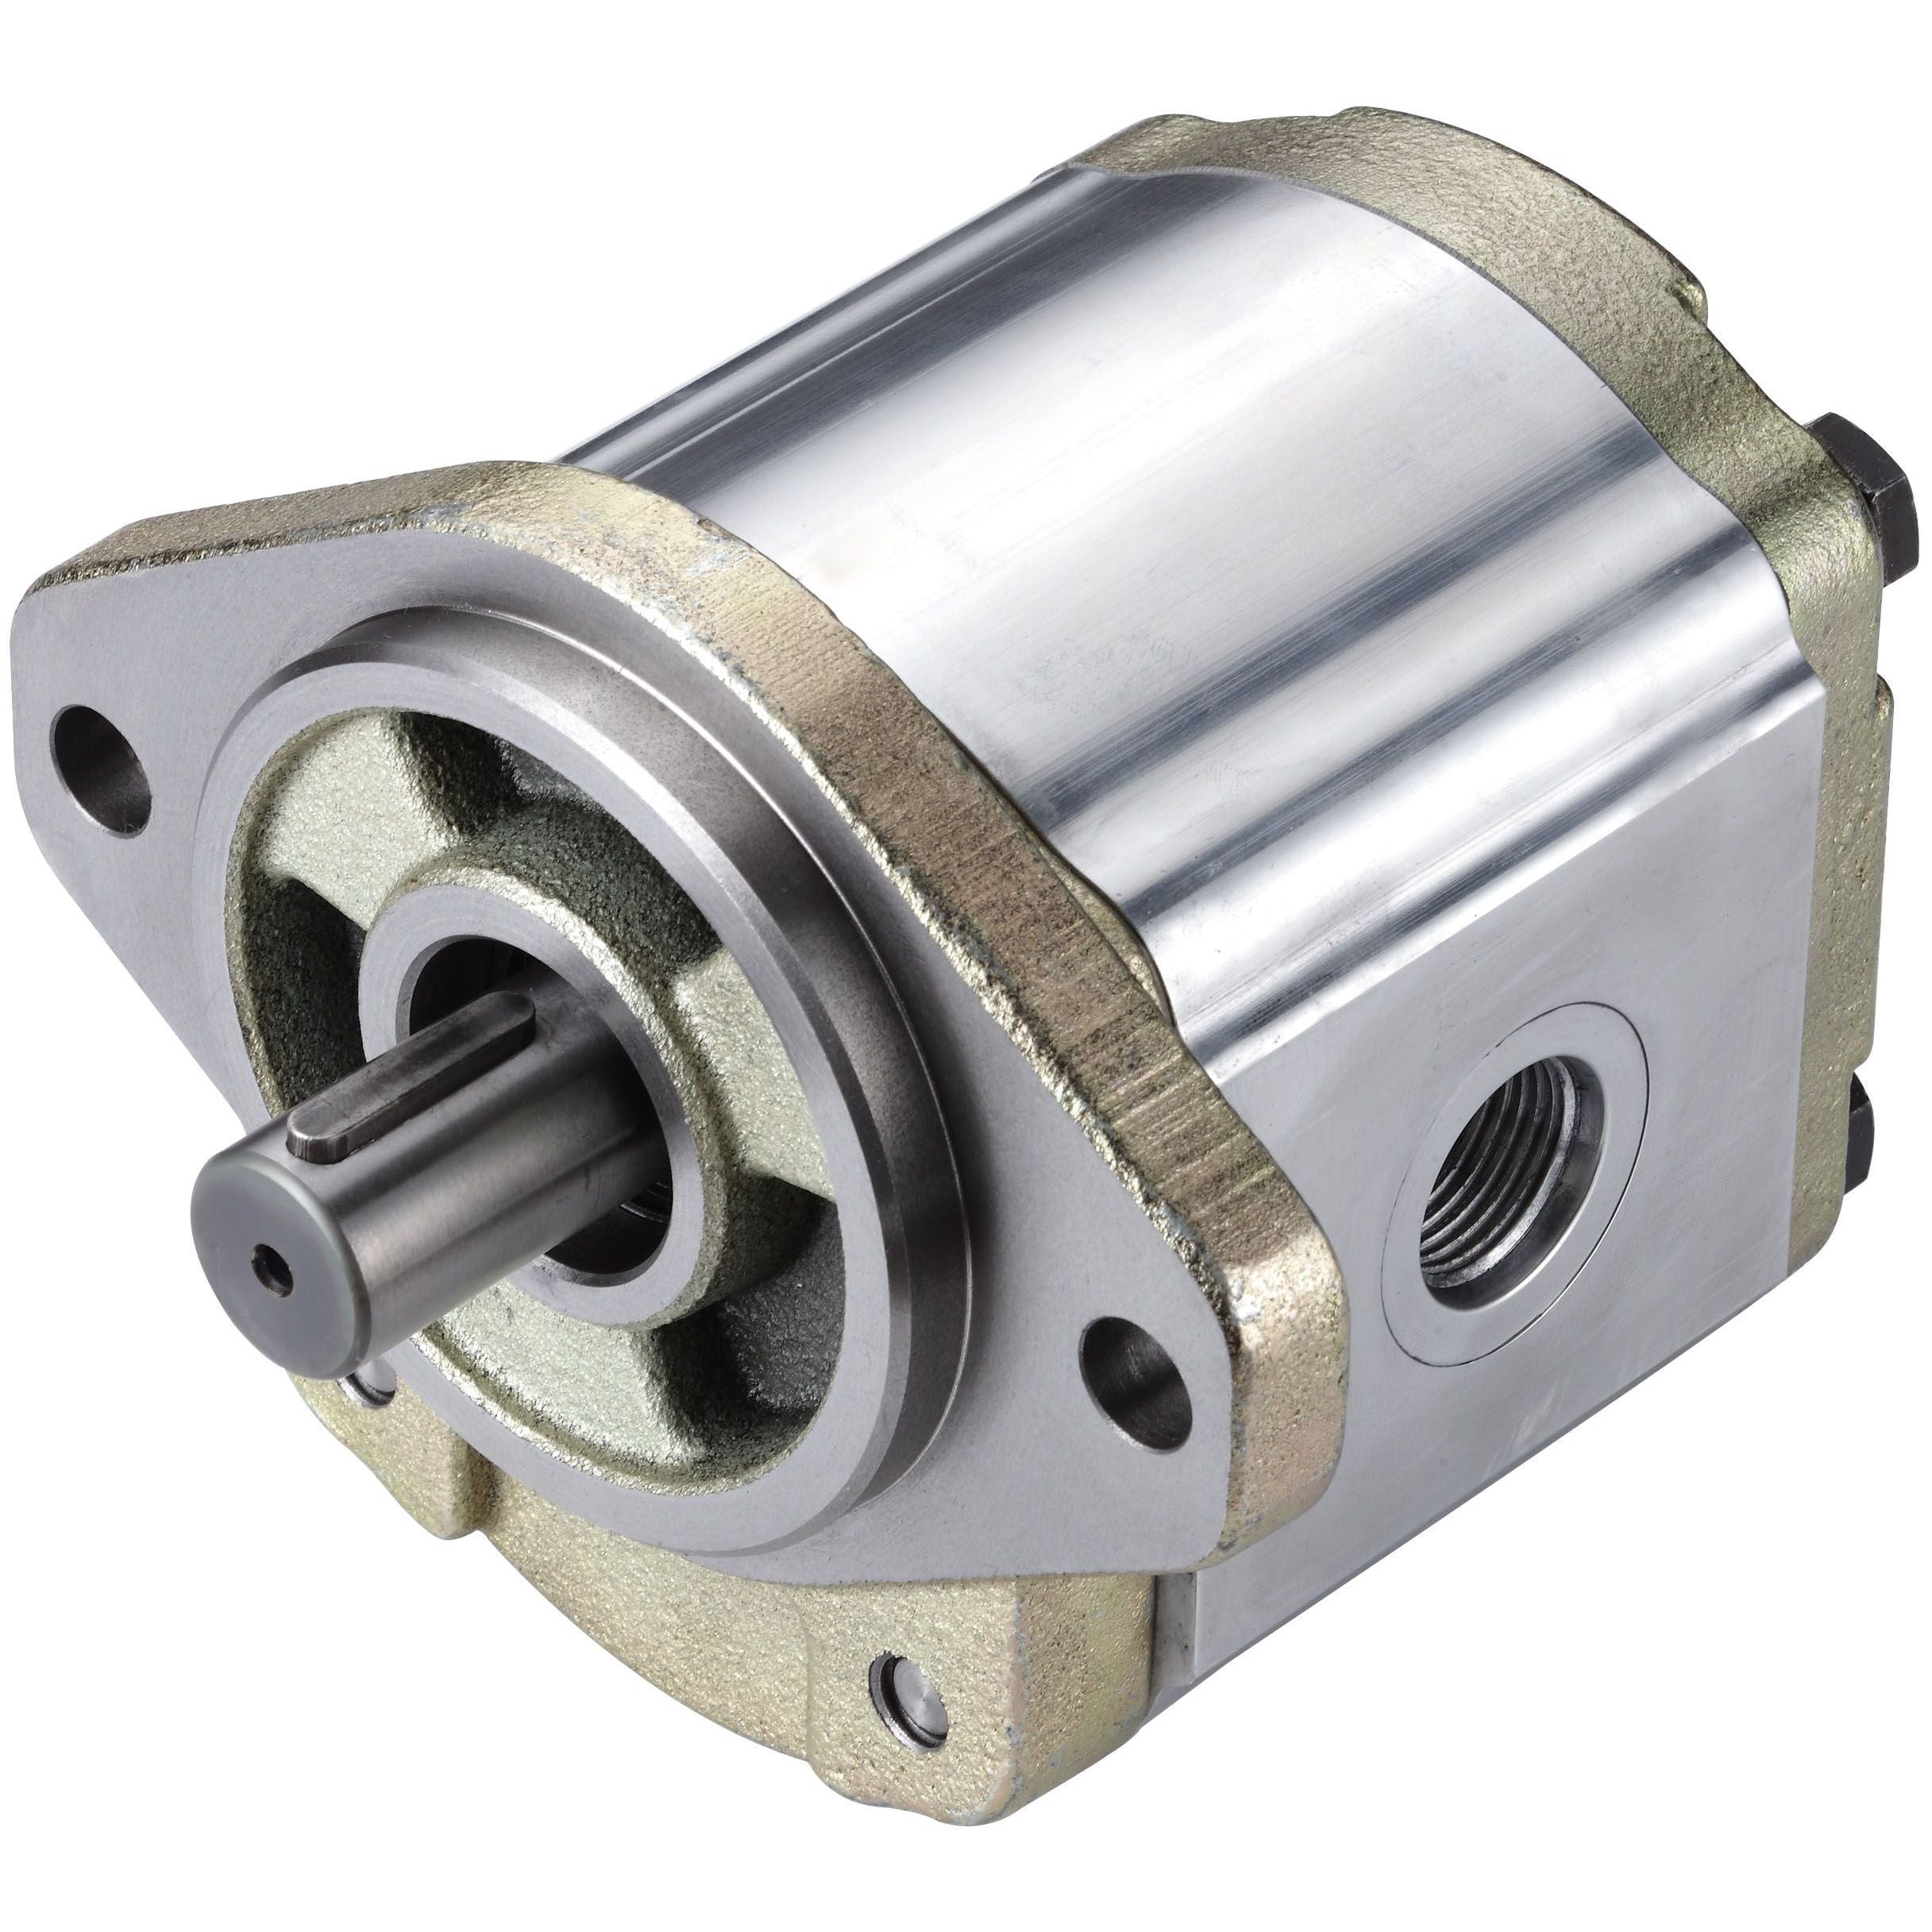 3GB8ZU390L : Honor Gear Pump, CCW Rotation, 90cc (5.49in3), 42.8 GPM, 2000psi, 2000 RPM, #20 SAE (1.25") In, #16 SAE (1") Out, Splined Shaft 13-Tooth, 16/32 Pitch, SAE B 2-Bolt Mount